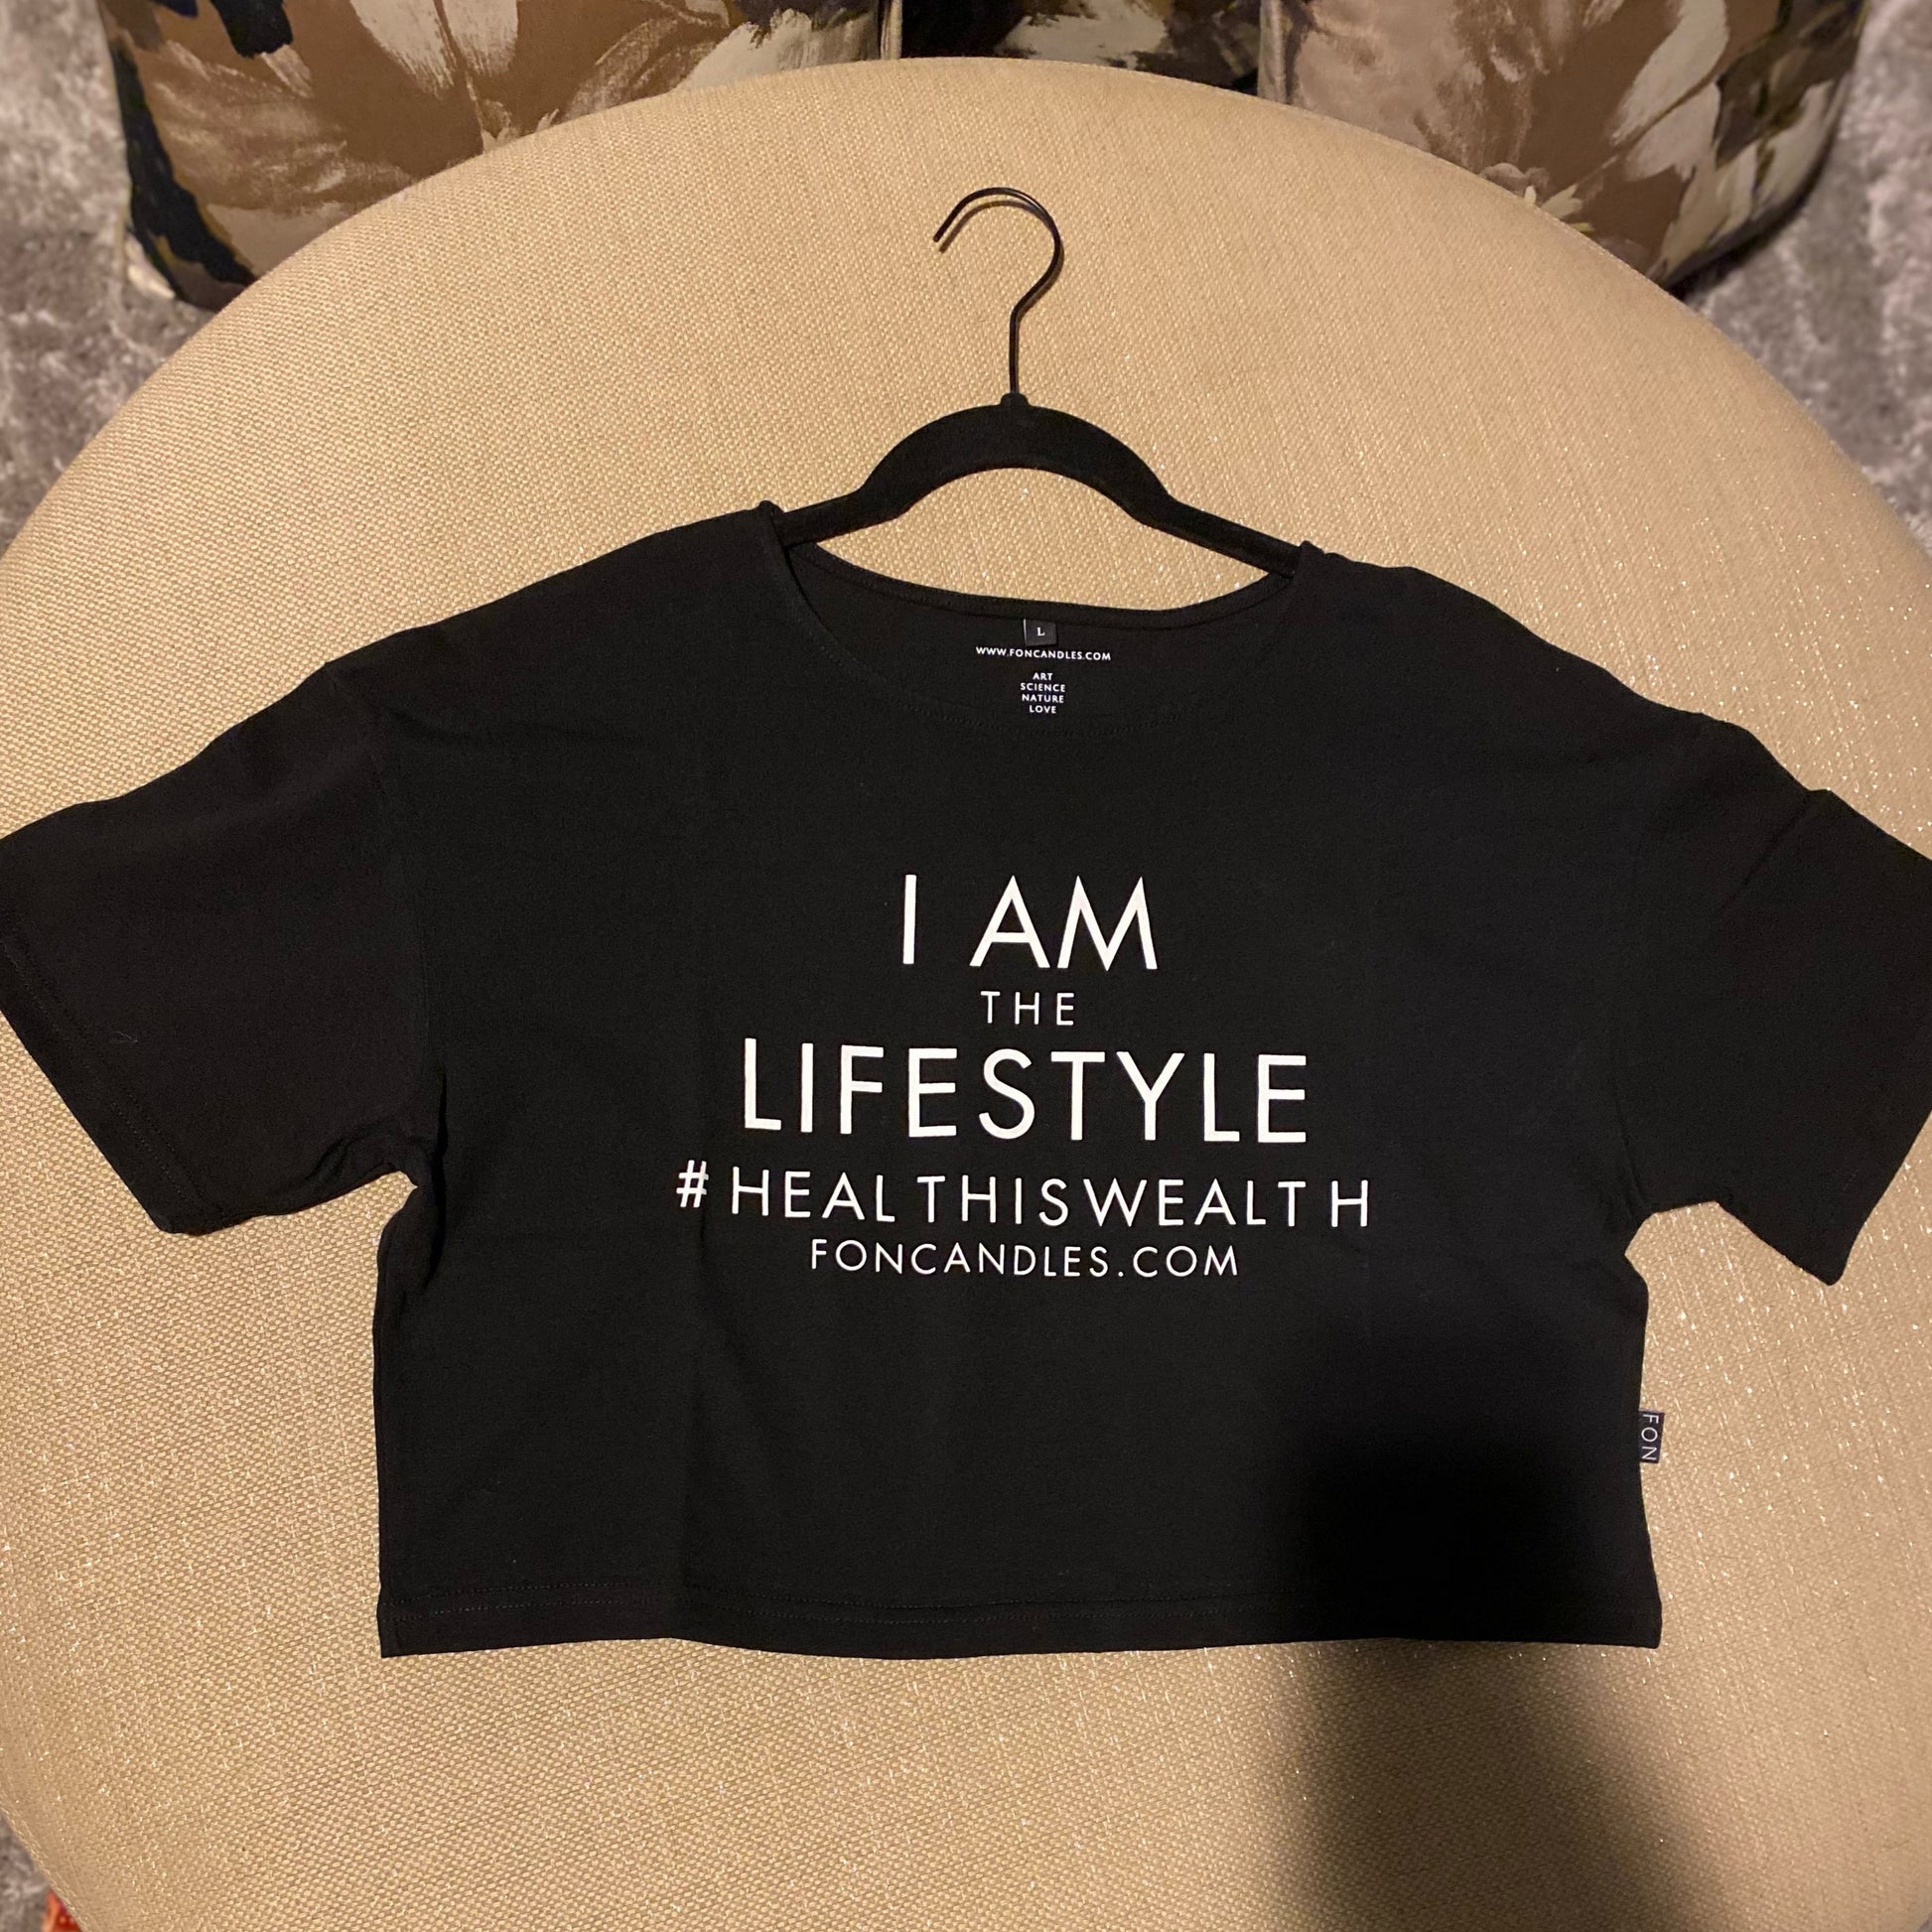 Black crop top with I Am the Lifestyle message #healthiswealth foncandles.com